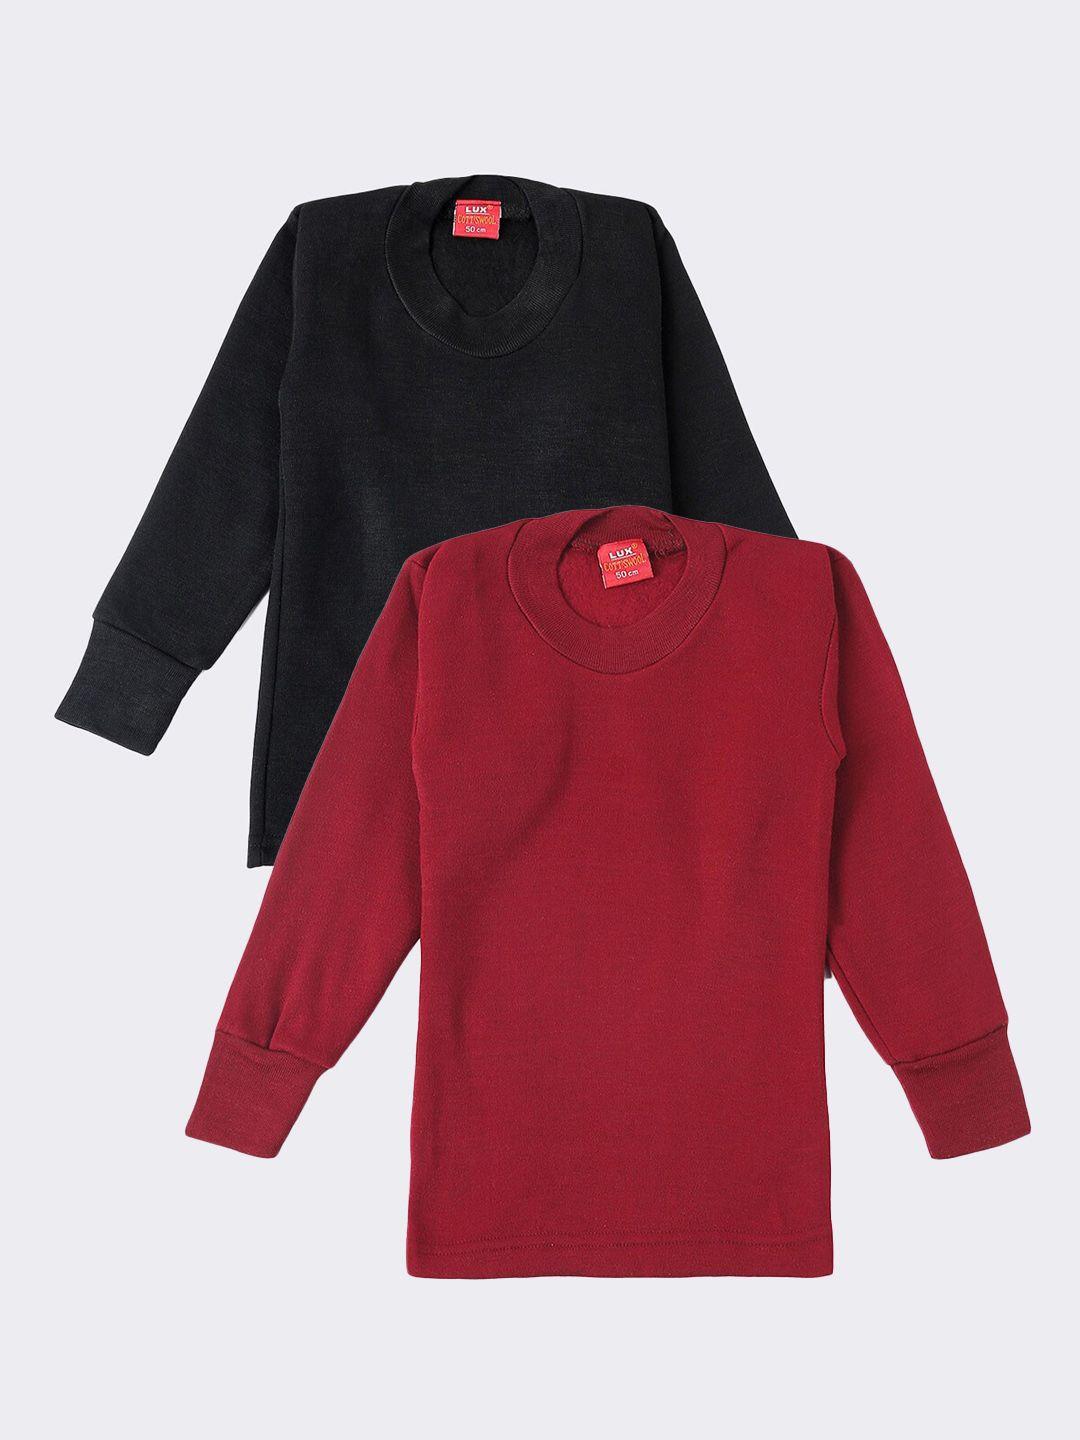 lux cottswool boys pack of 2 black & maroon solid cotton thermal tops